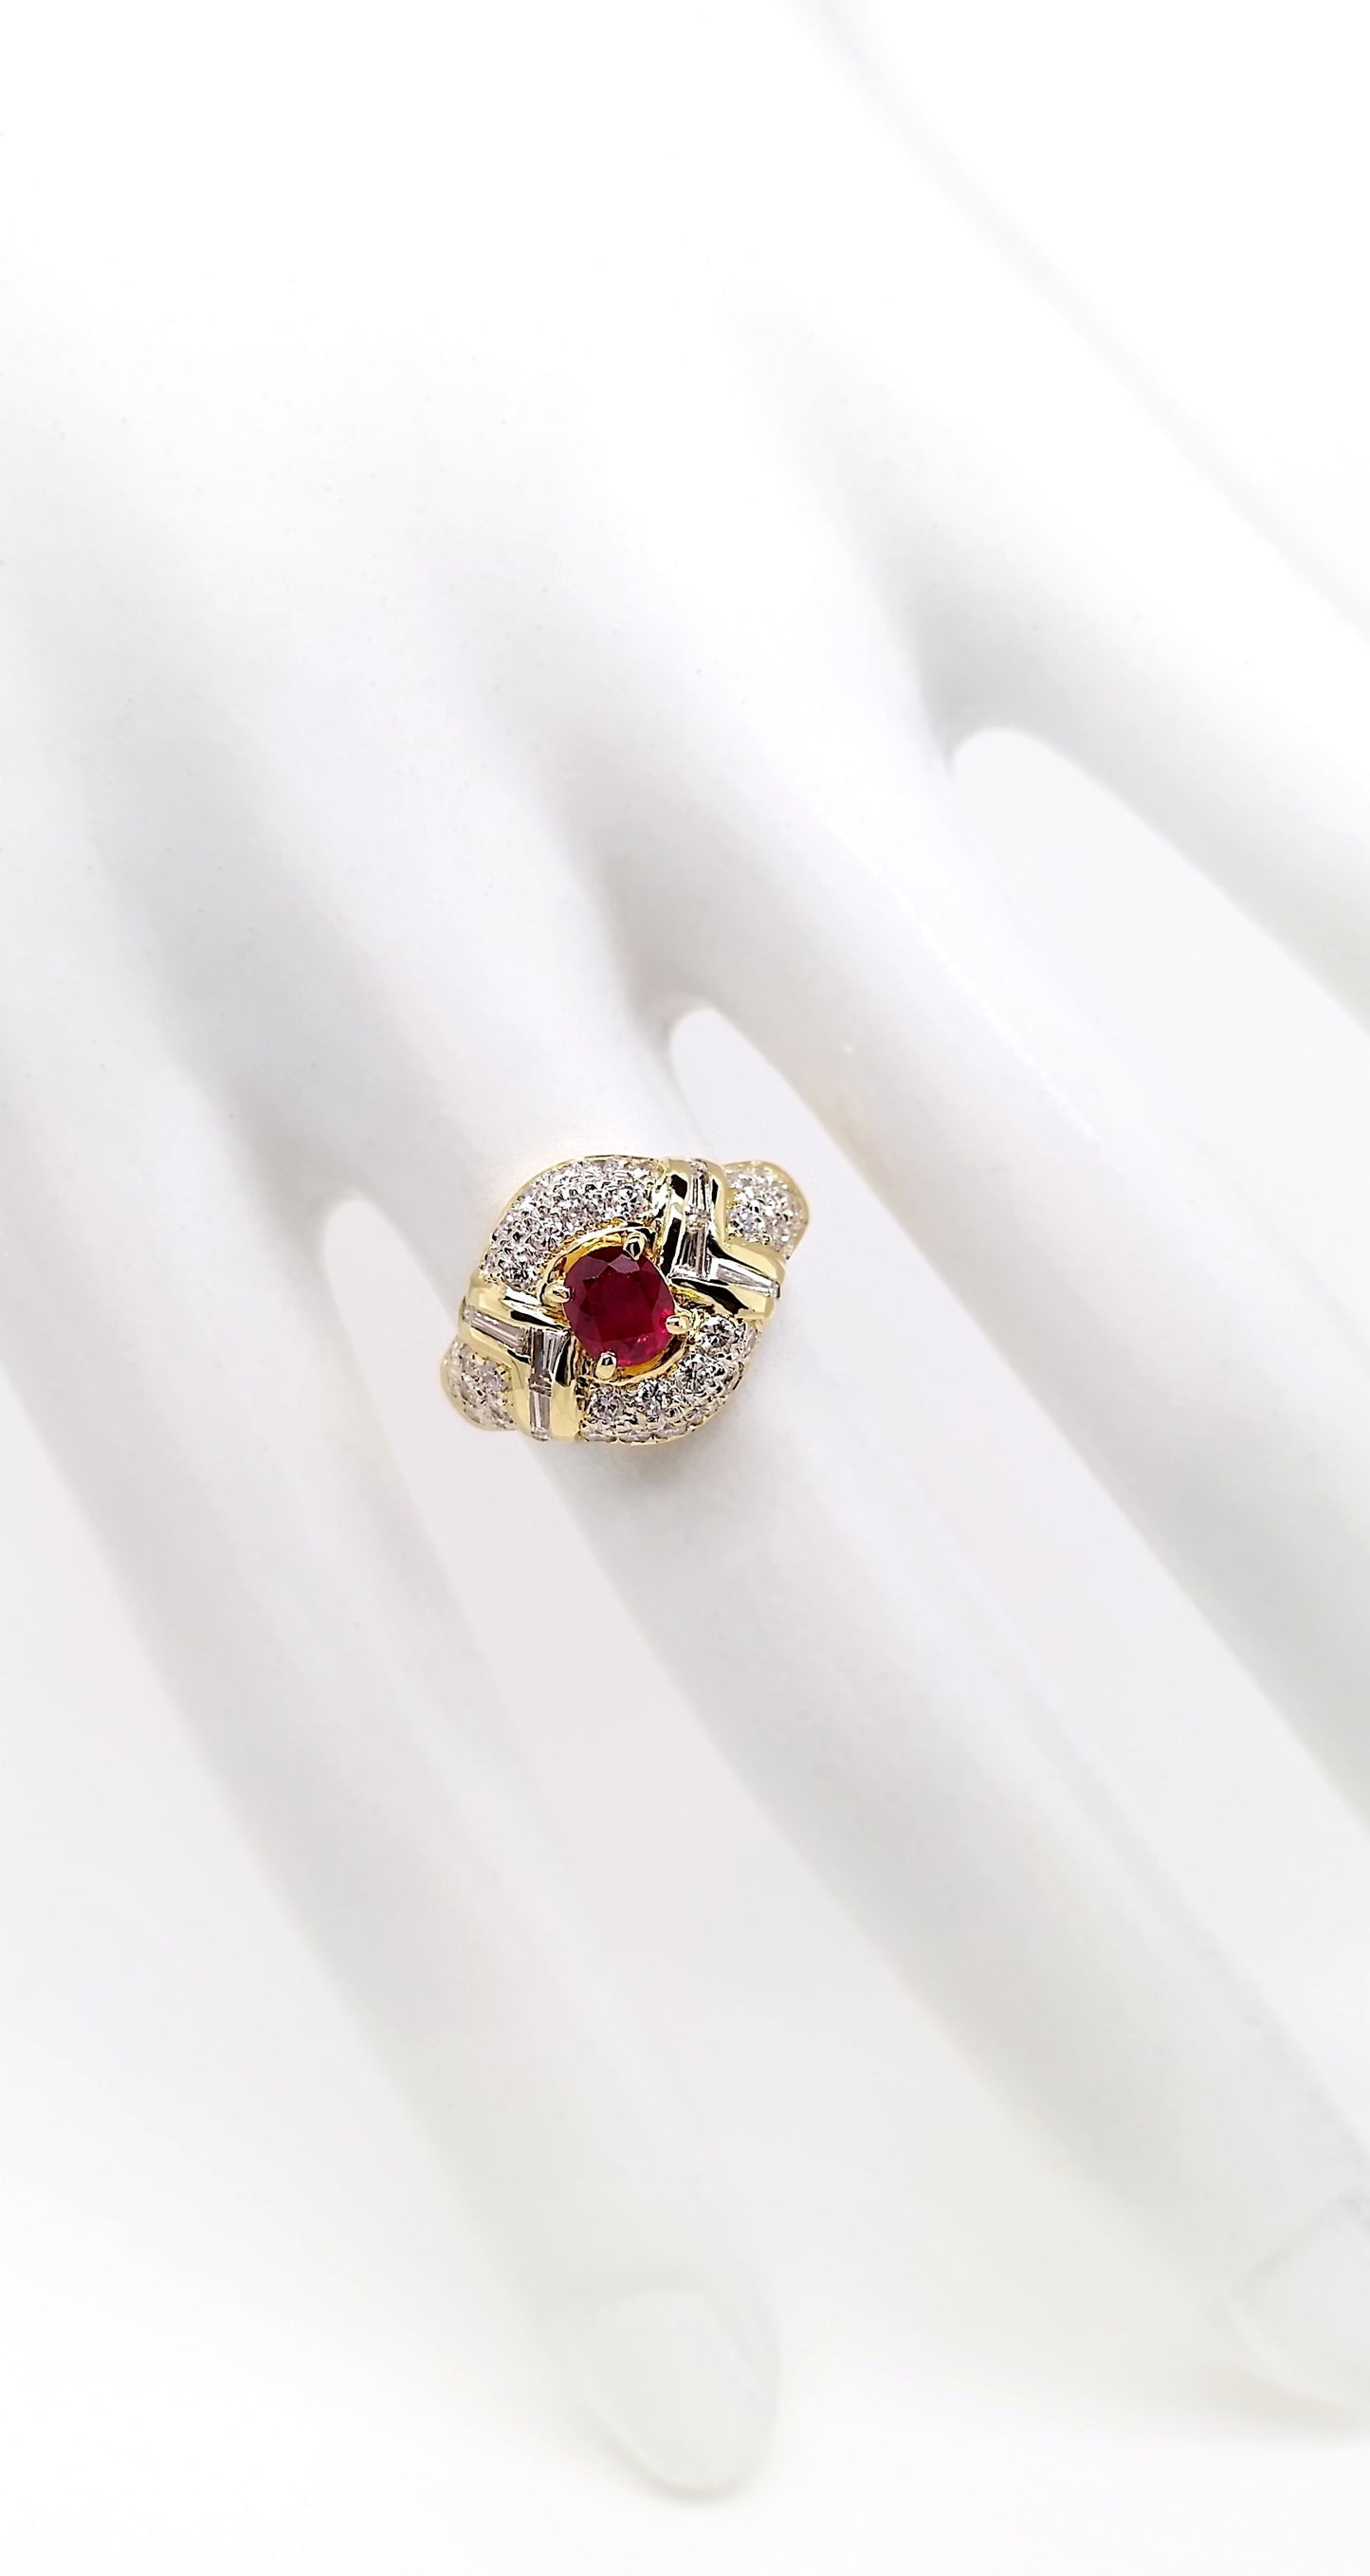 0.55ct NATURAL RUBY accented by 1.07ct NATURAL DIAMONDS set with 18K Yellow Gold Ring - SALE